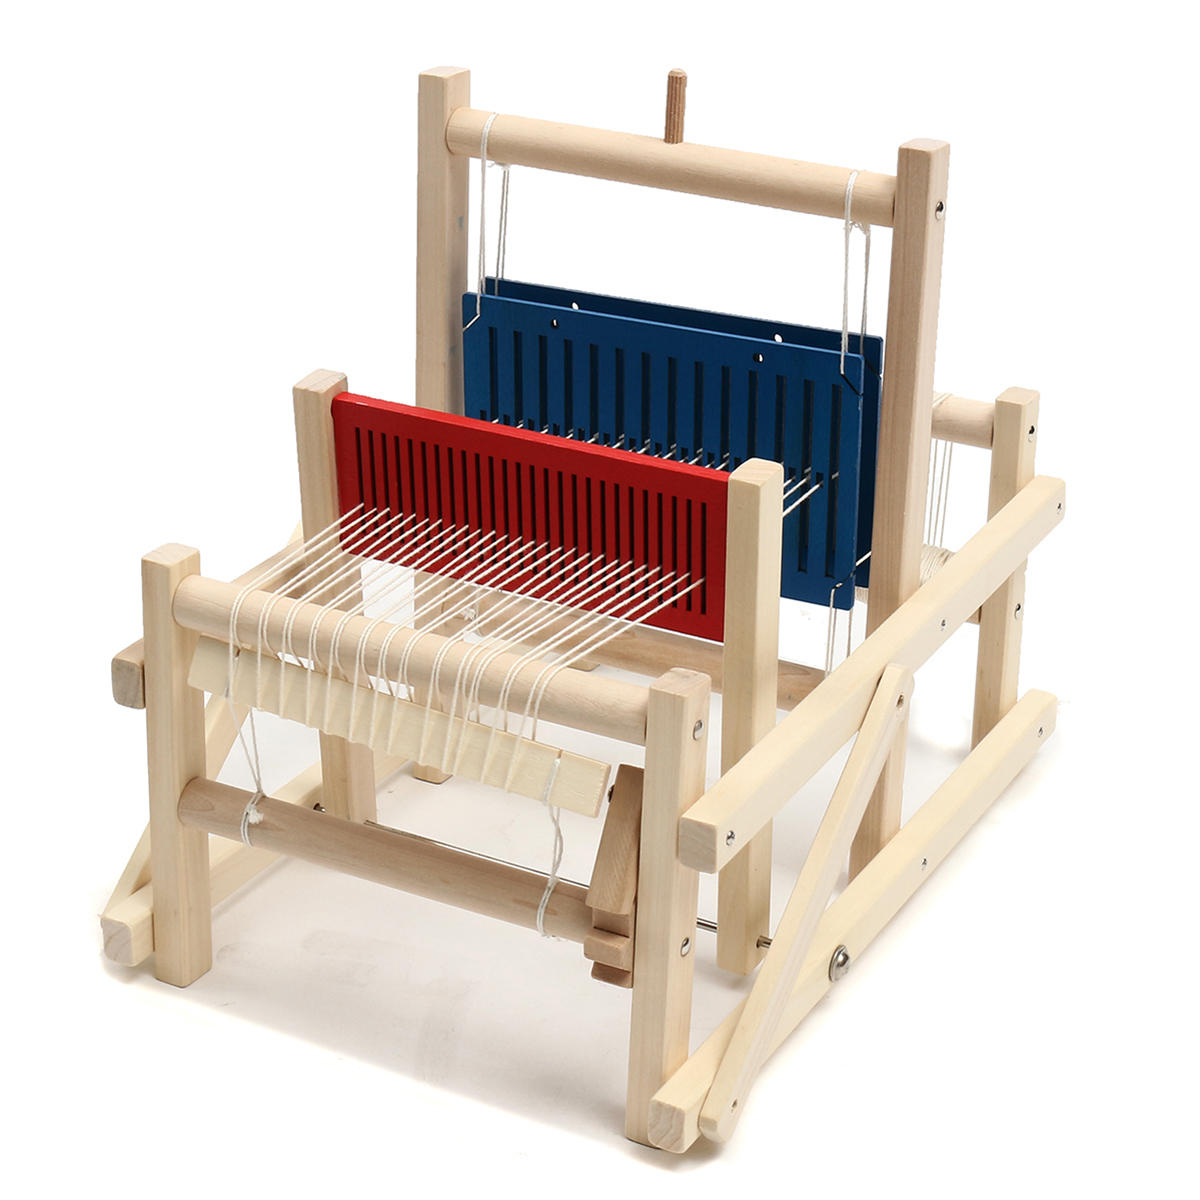 Knitting machine table for sale